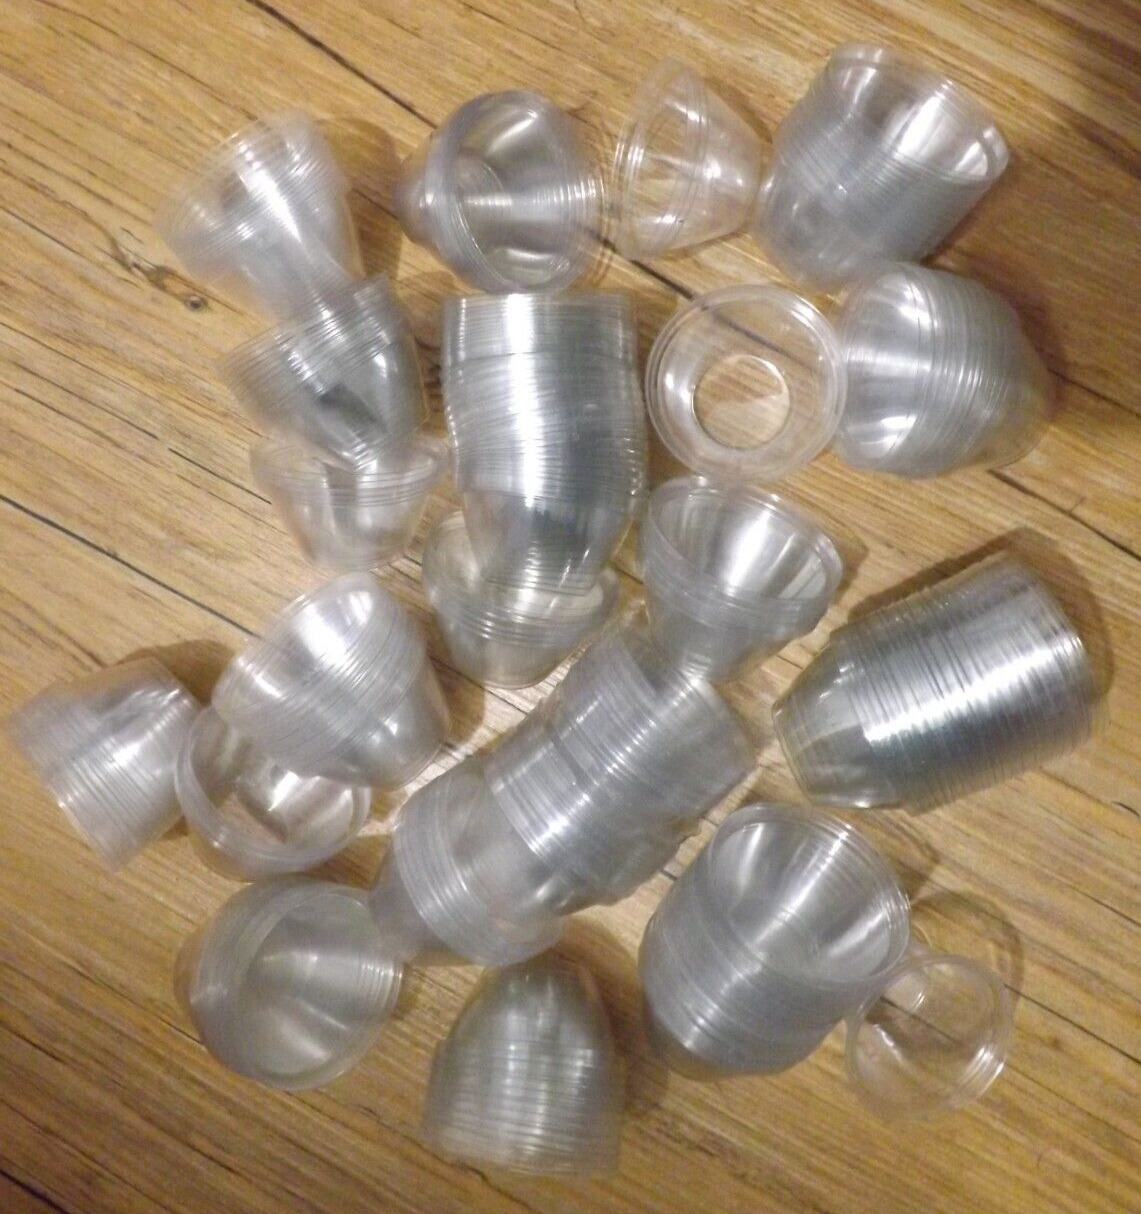 HUGE NEW LOT 100+ AEROGARDEN clear plastic dome covers for plant baskets